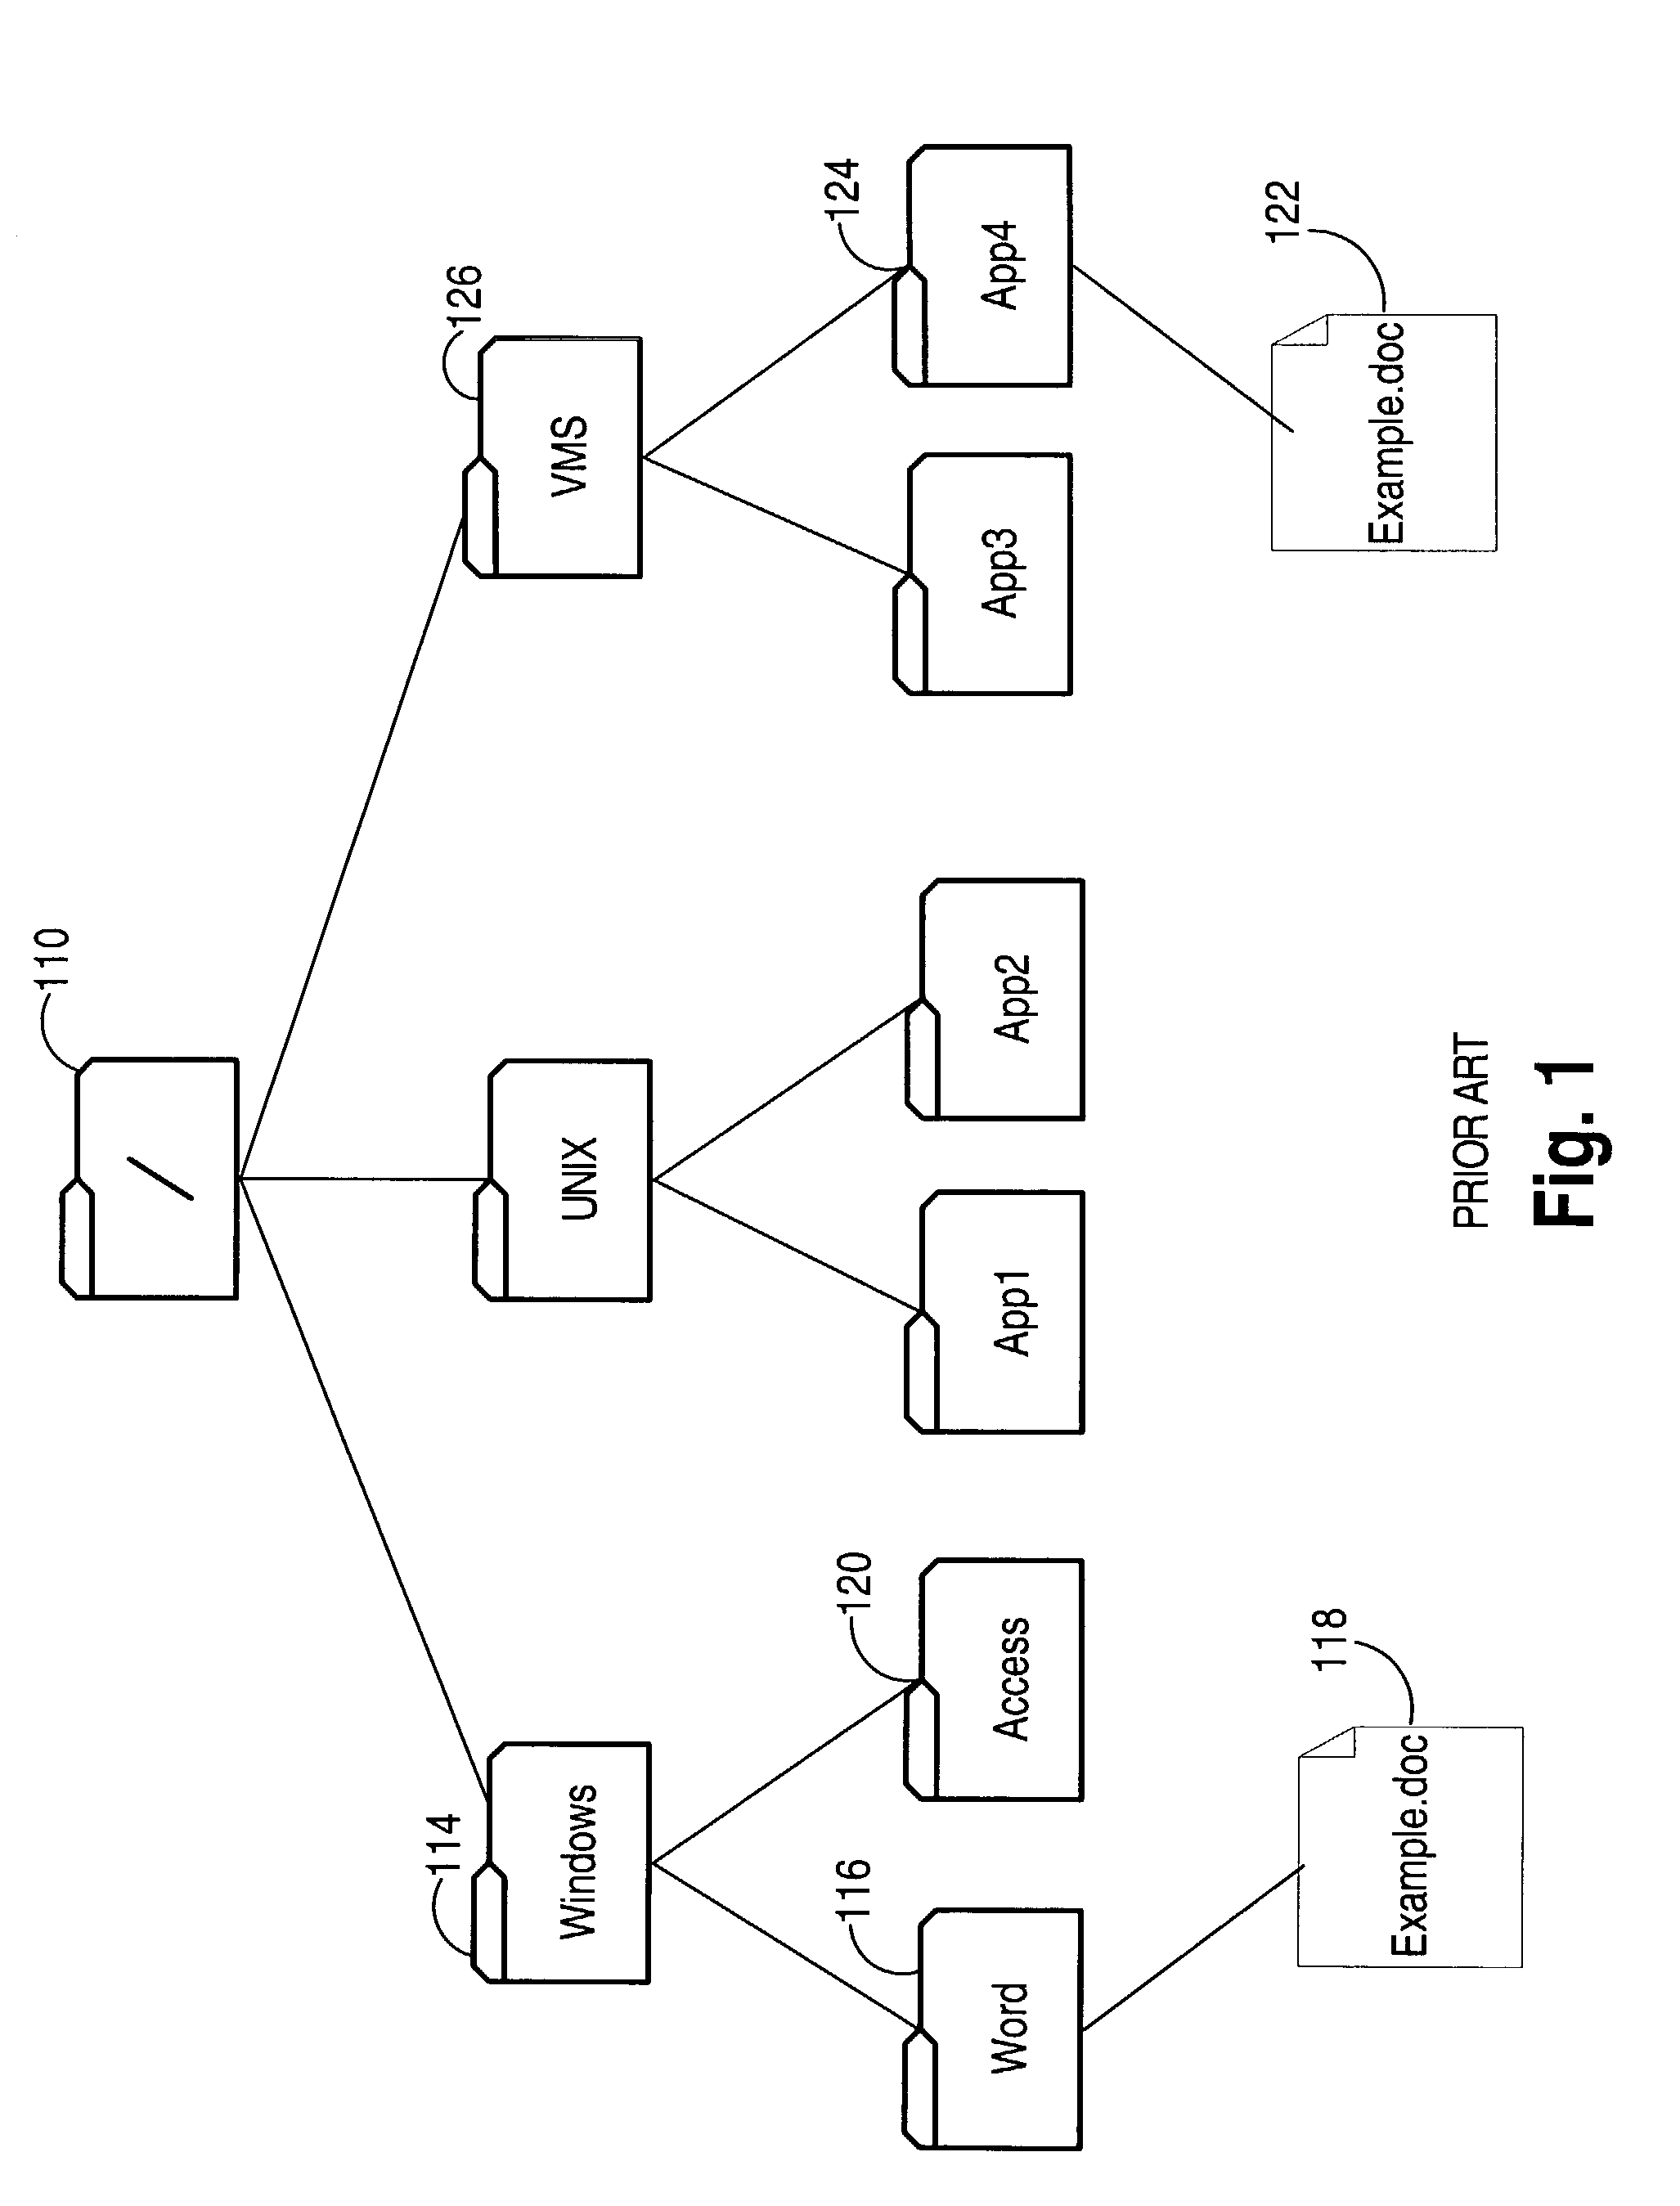 Mechanisms for storing content and properties of hierarchically organized resources